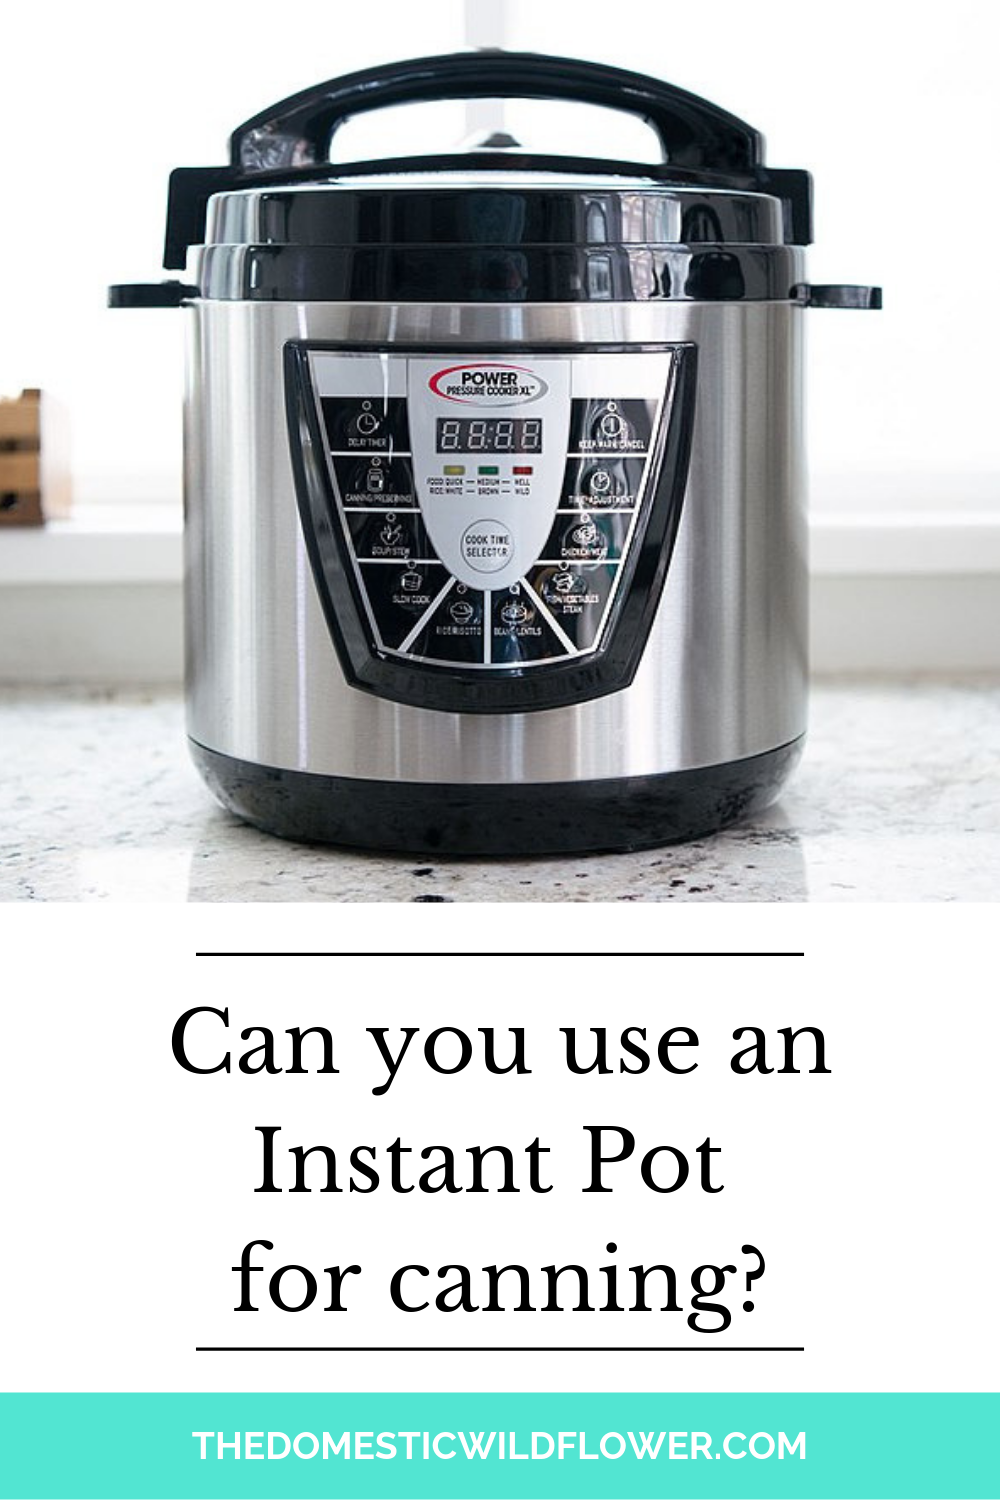 Is it safe to use an Instant Pot for pressure canning? - Reviewed